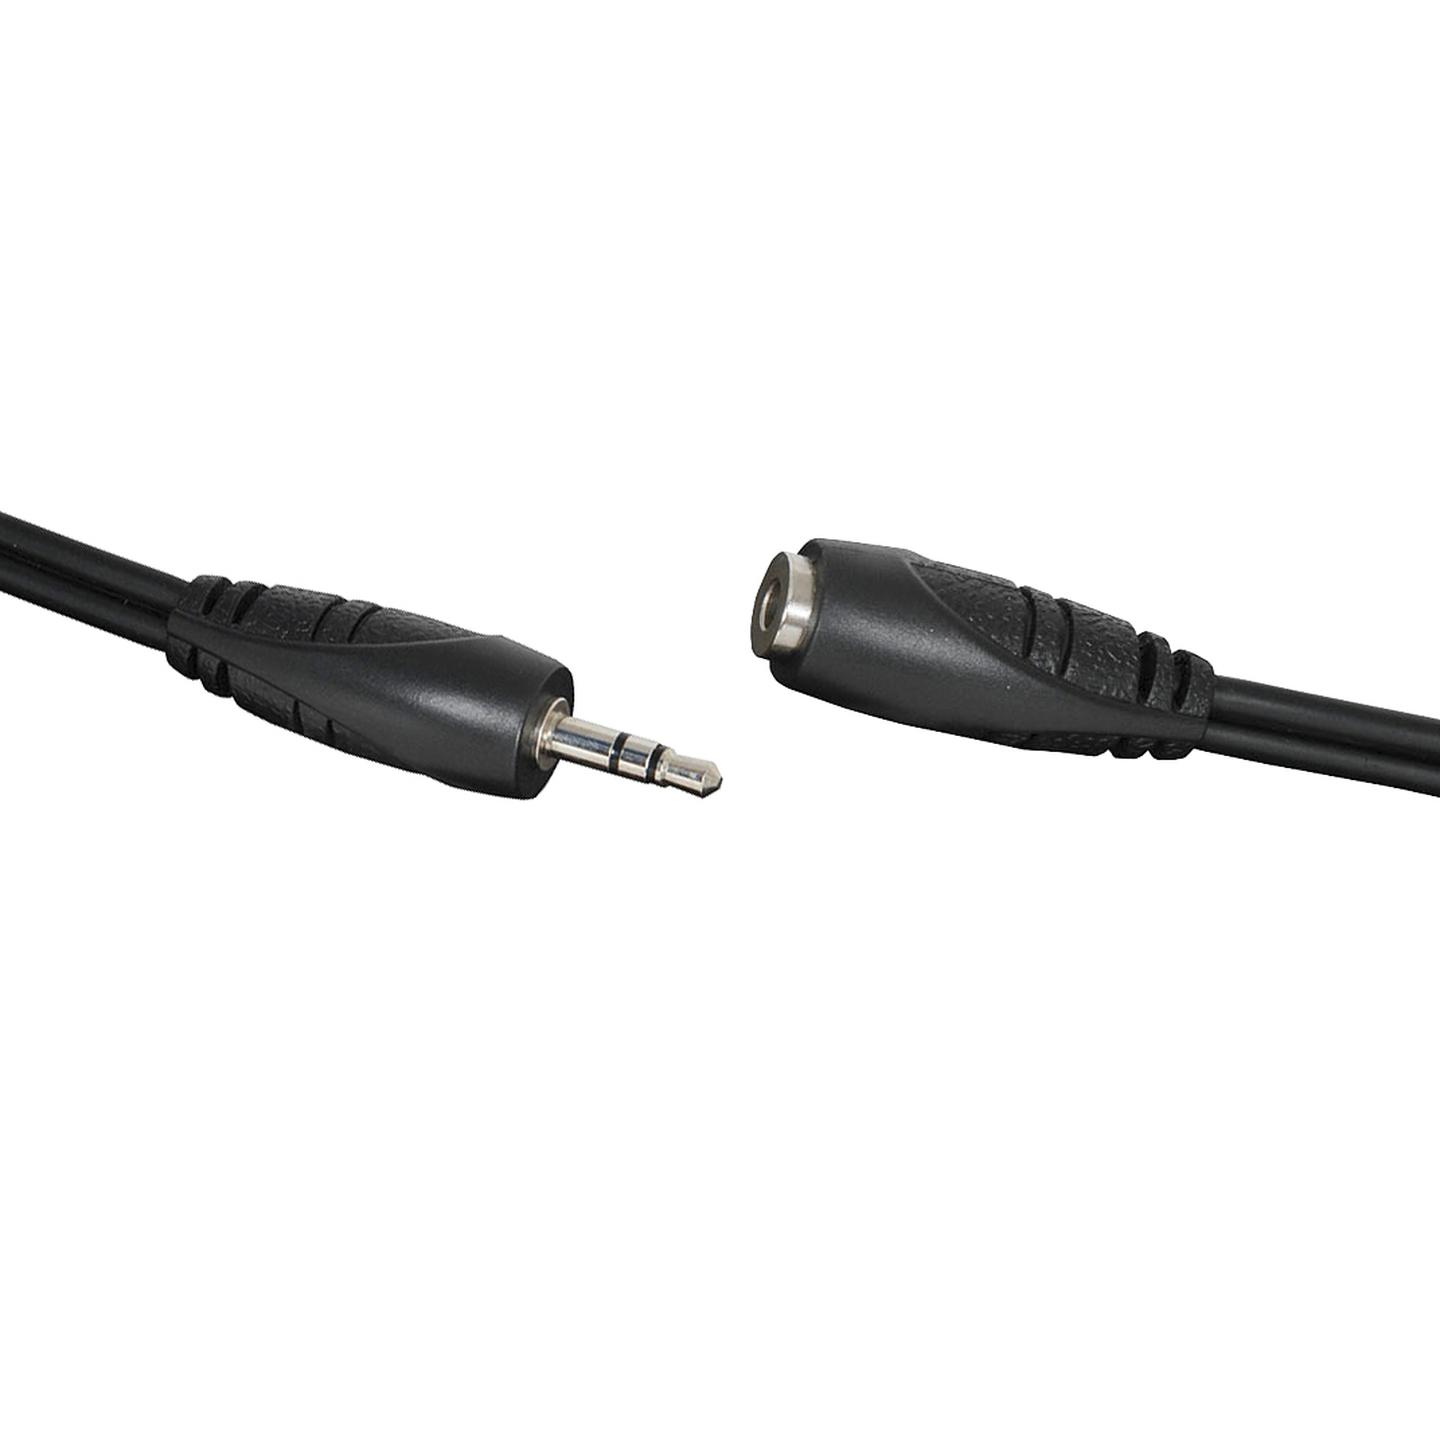 Audio Cable Stereo 3.5mm Plug to 3.5mm Socket